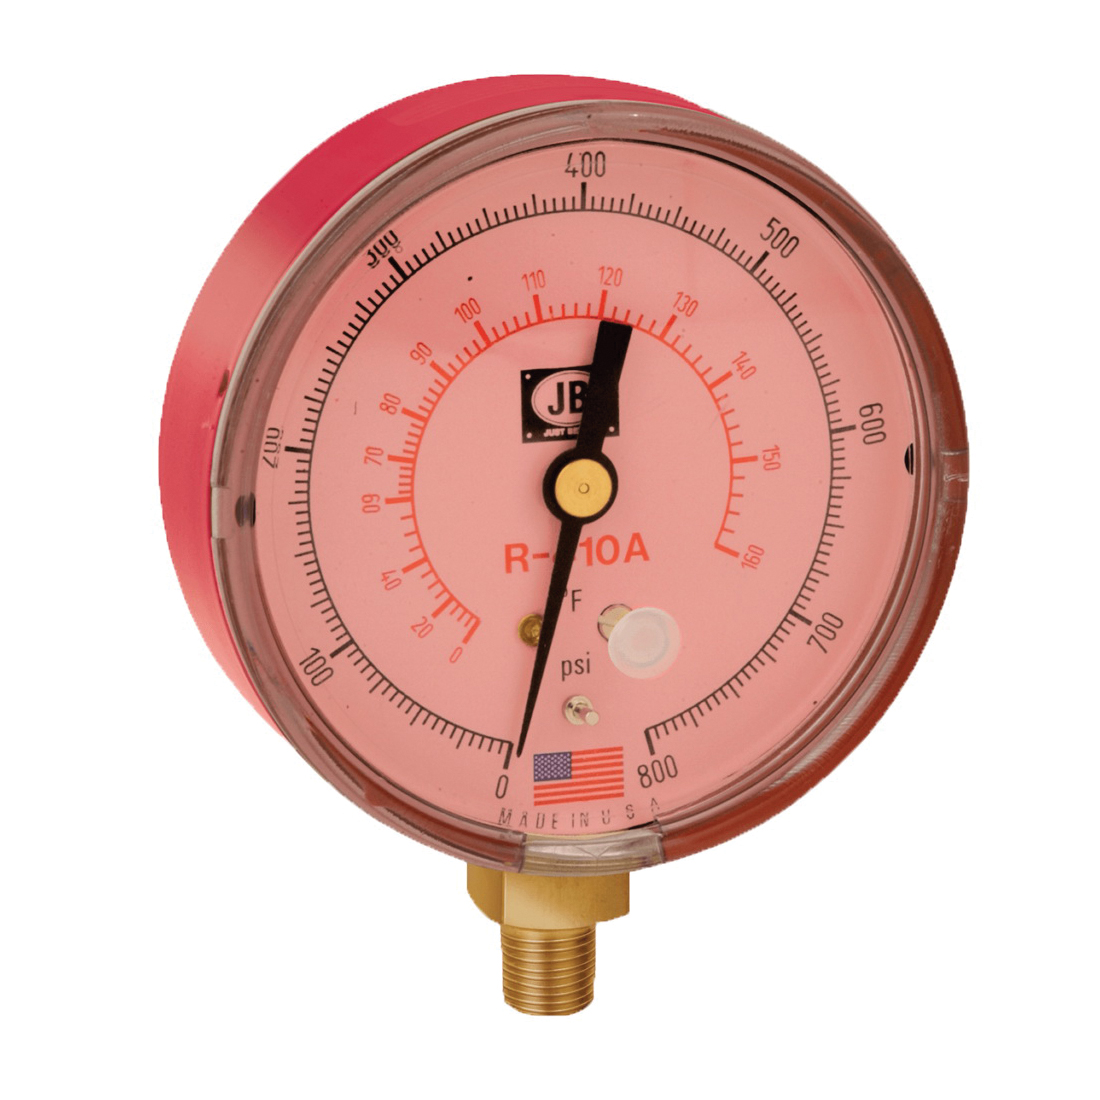 JB Industries M2-415 Manifold Gauge, 2-1/2 in Dial, 0 to 800 psi, 1/8 in